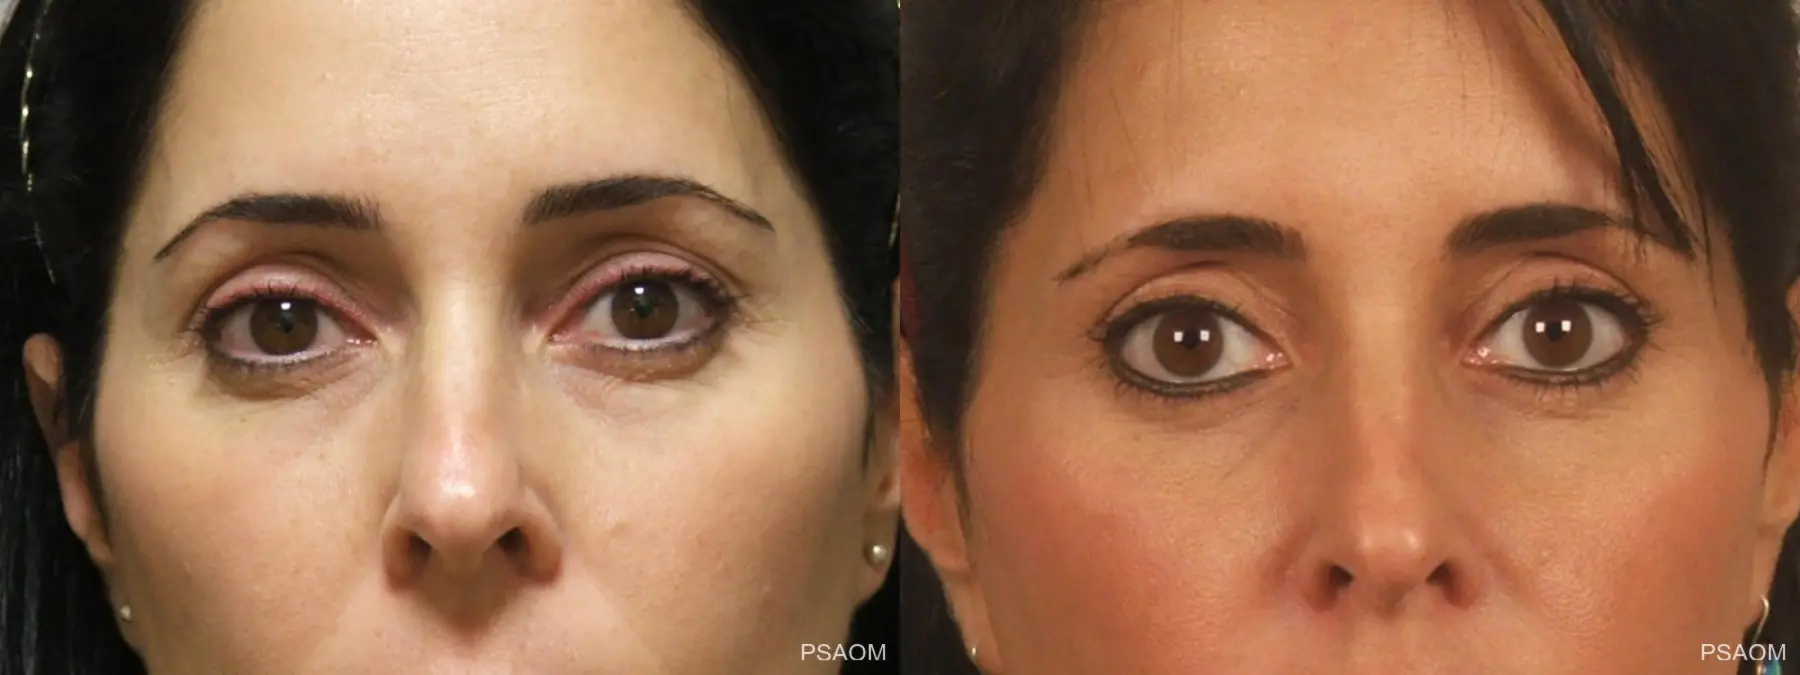 Eyelid Lift: Patient 2 - Before and After 1